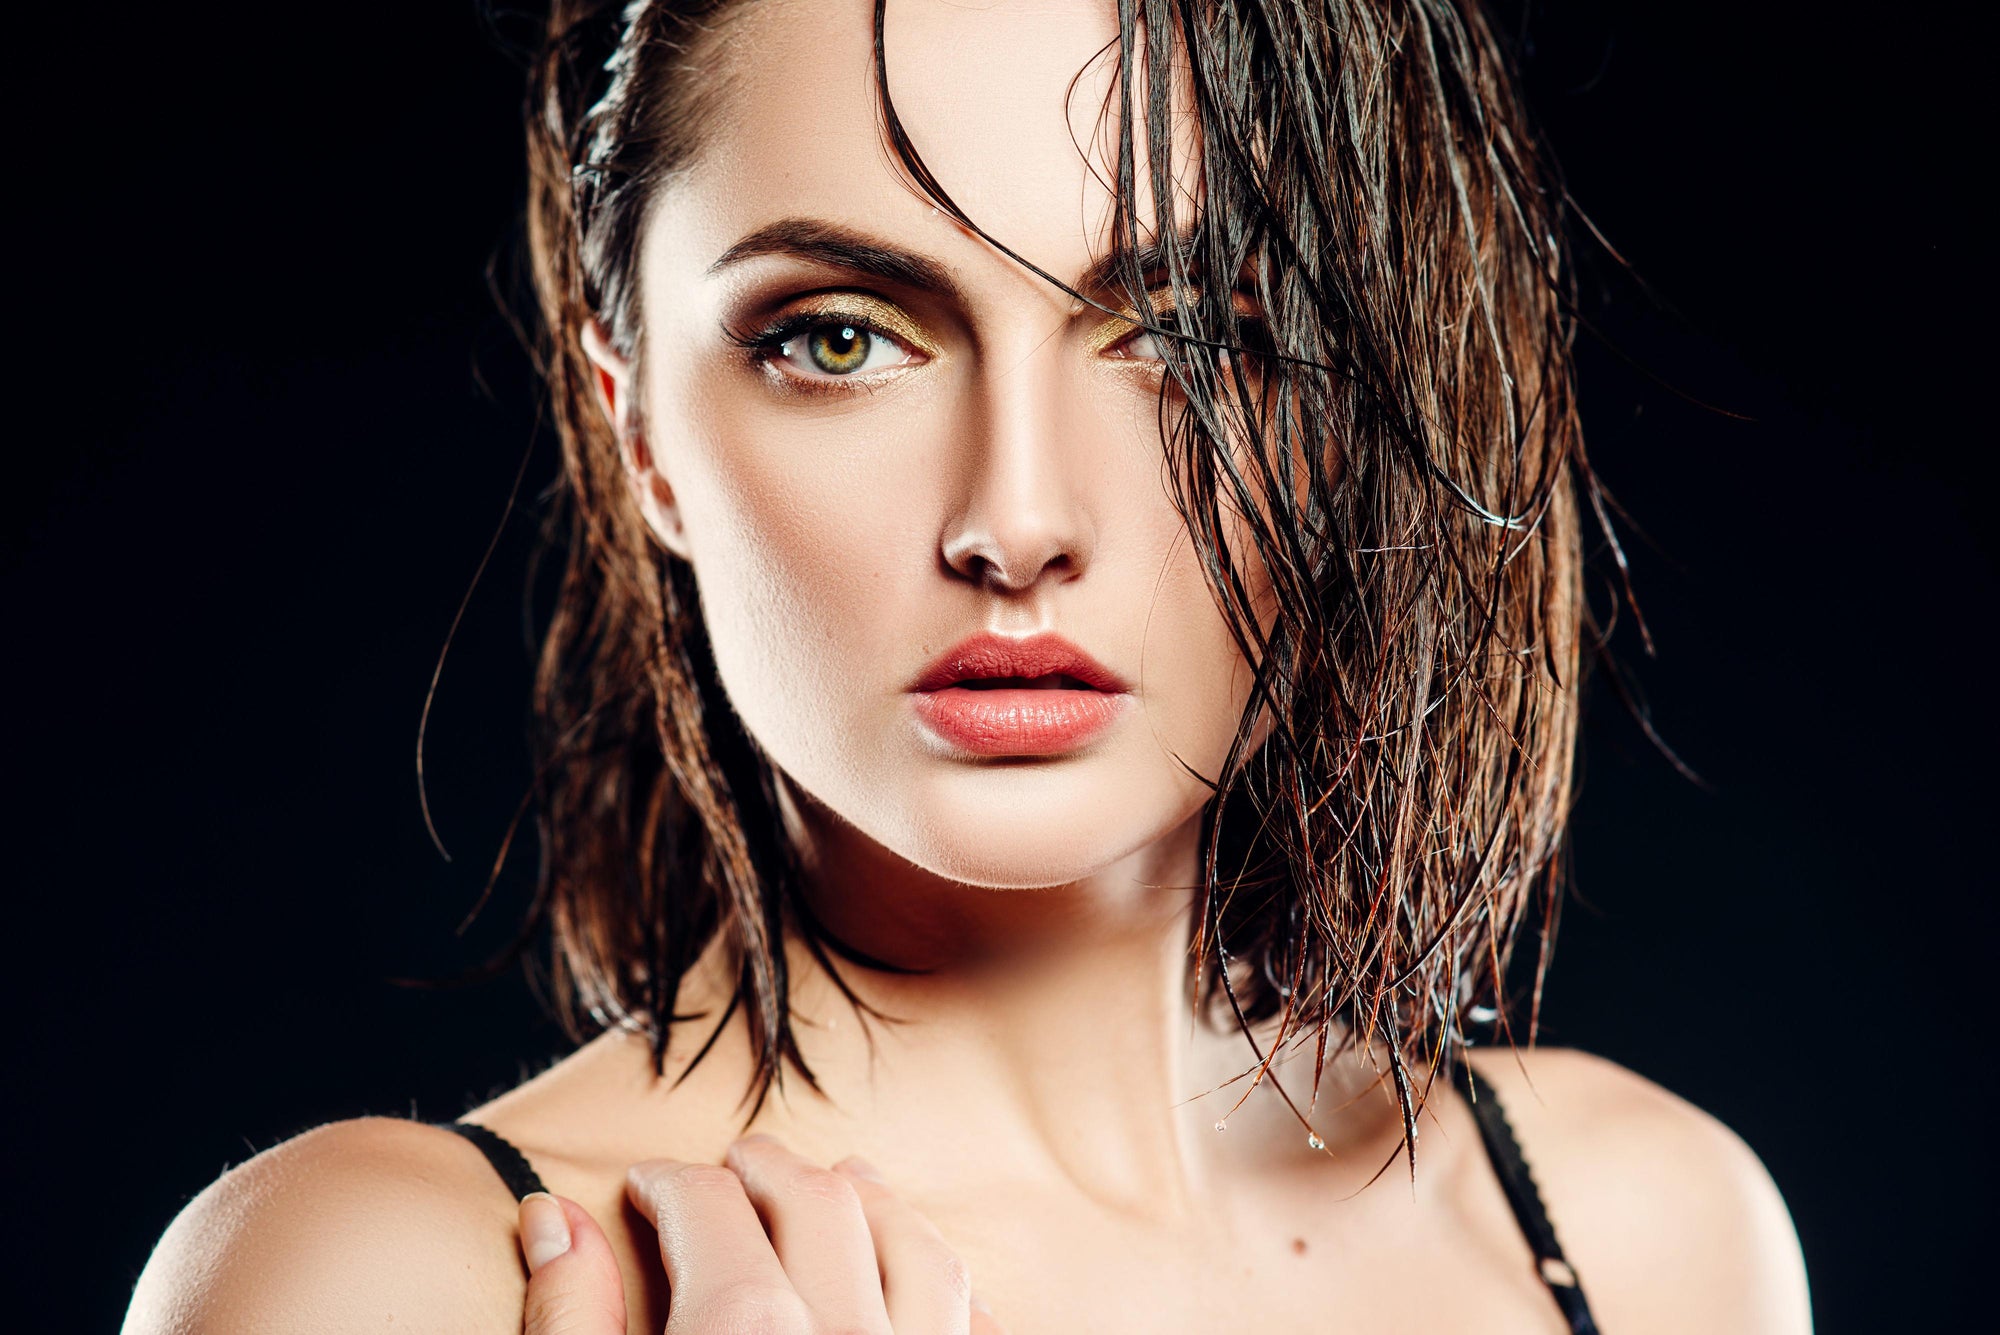 The Wet Hair Takeover: The Latest Beauty Trend & How to Achieve It Yourself